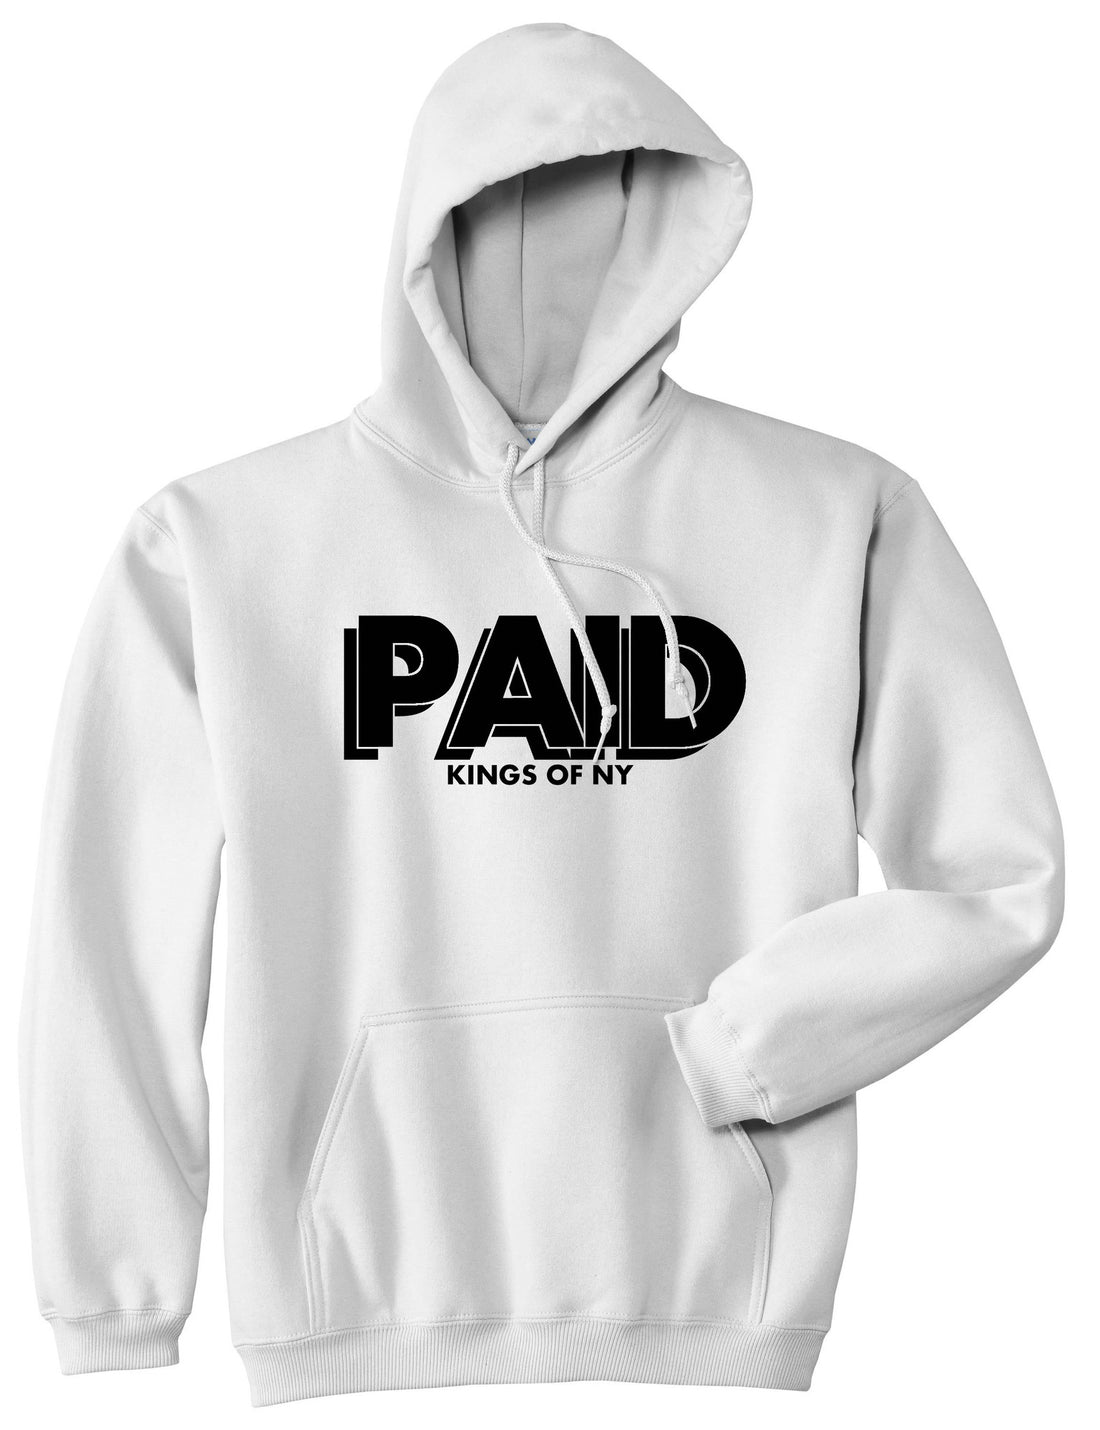 PAID Kings Of NY W15 Pullover Hoodie in White By Kings Of NY